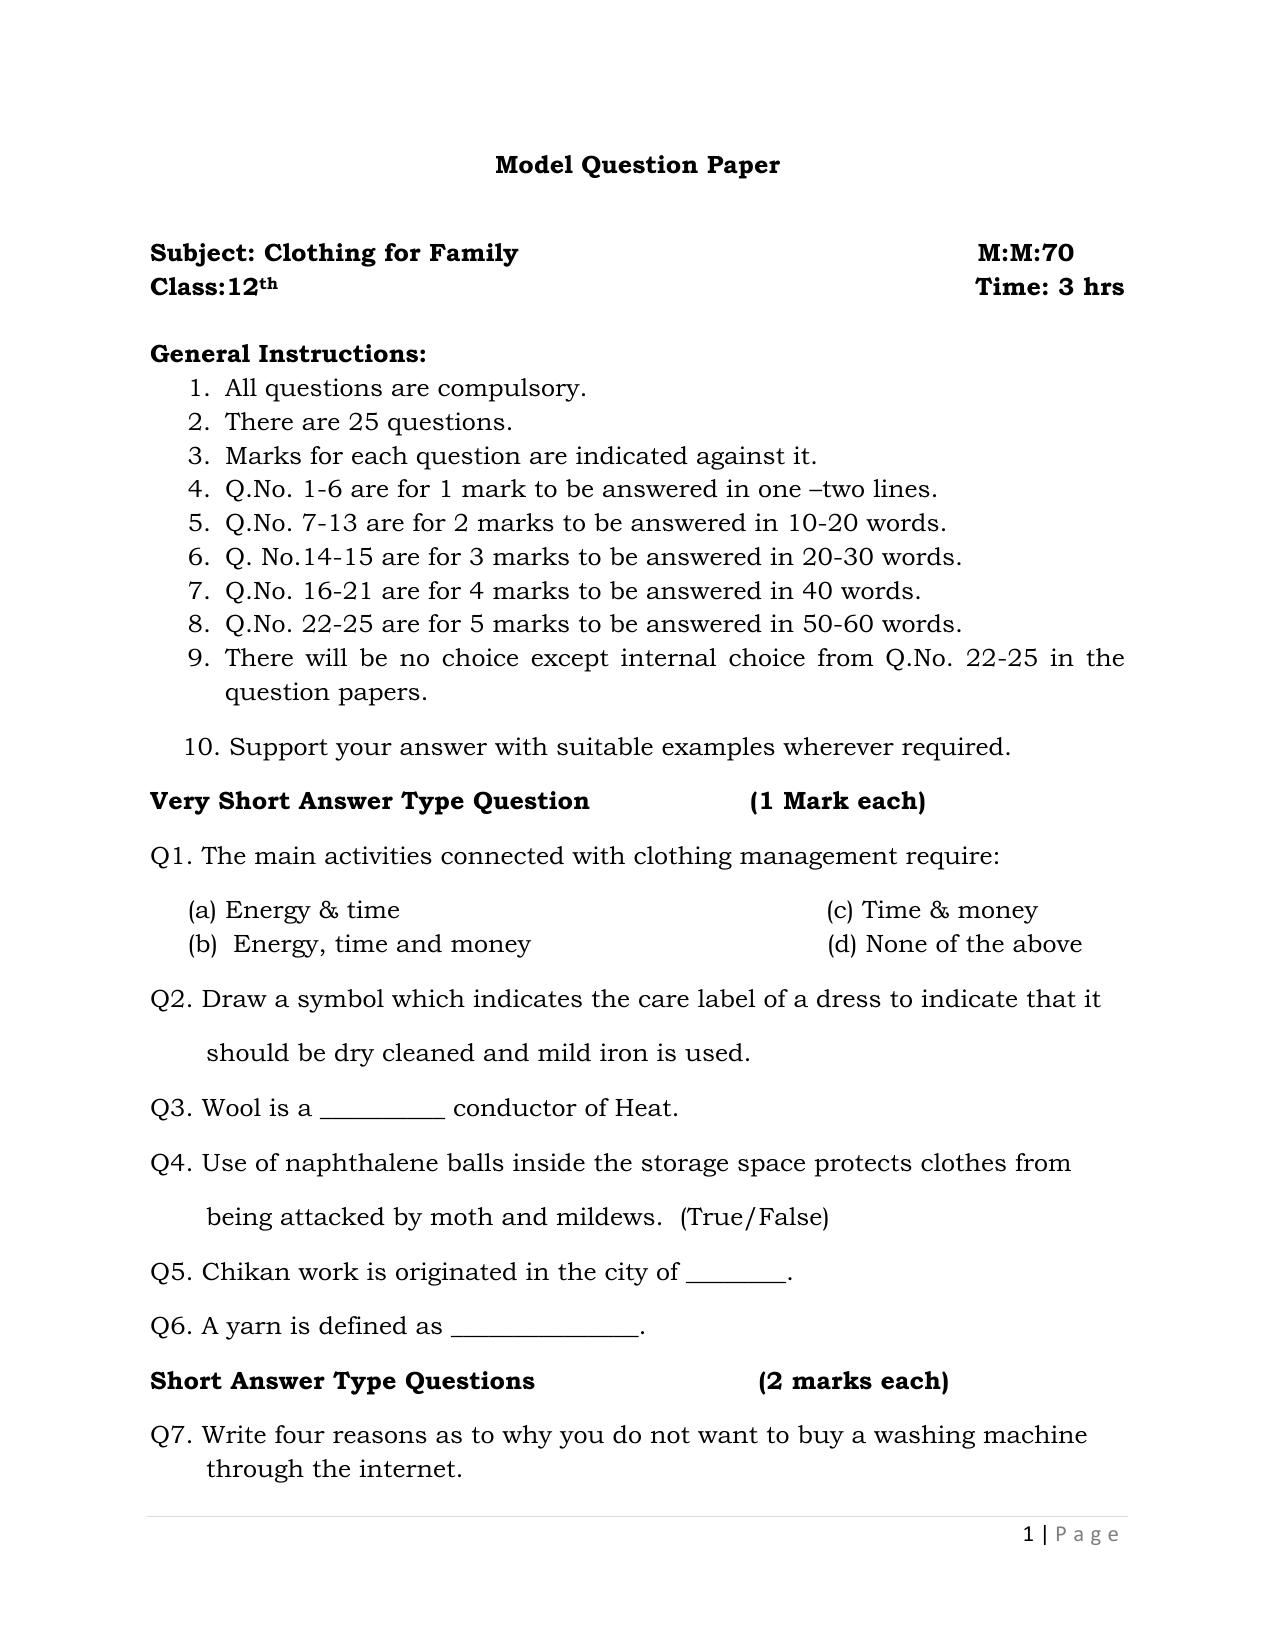 JKBOSE Class 12 Clothing for Family Model Question Paper - Page 1